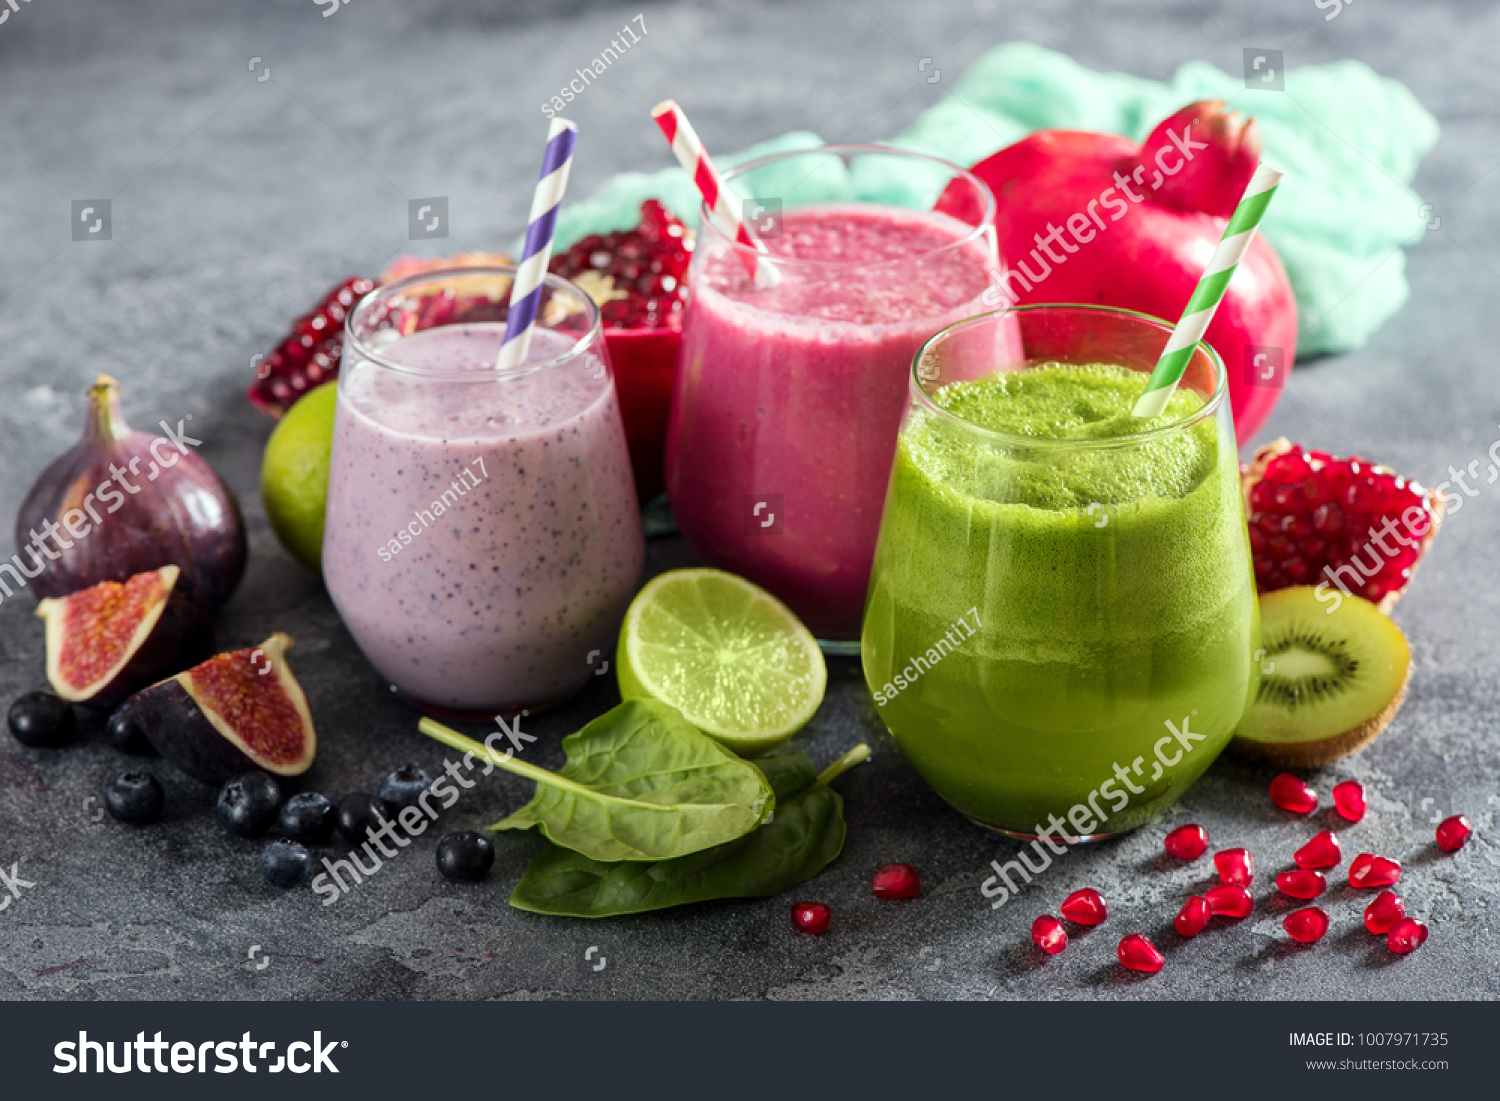 Colorful smoothie, healthy detox vitamin diet or vegan food concept, fresh vitamins, breakfast drink with spinach, pomegranate, figs and blueberries #1007971735